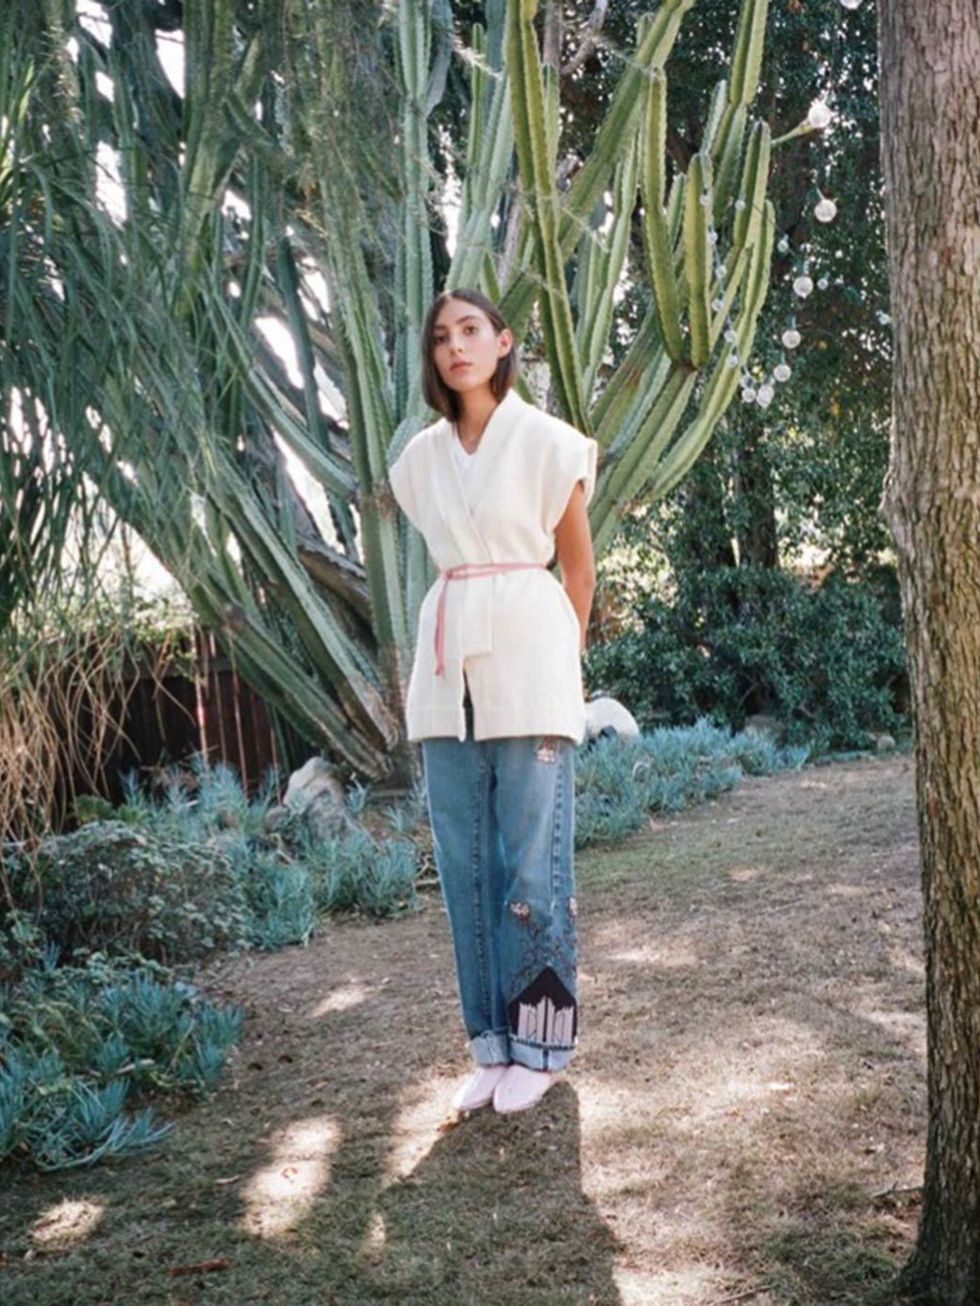 <p>Bliss And Mischief's founder, Hilary Justin, is a vintage obsessive - and it shows. Her relaxed pieces in washed out colours have a well-worn feel before you even pull them on. Take note in particular of the Western embroidered jeans.</p>

<p><a href="